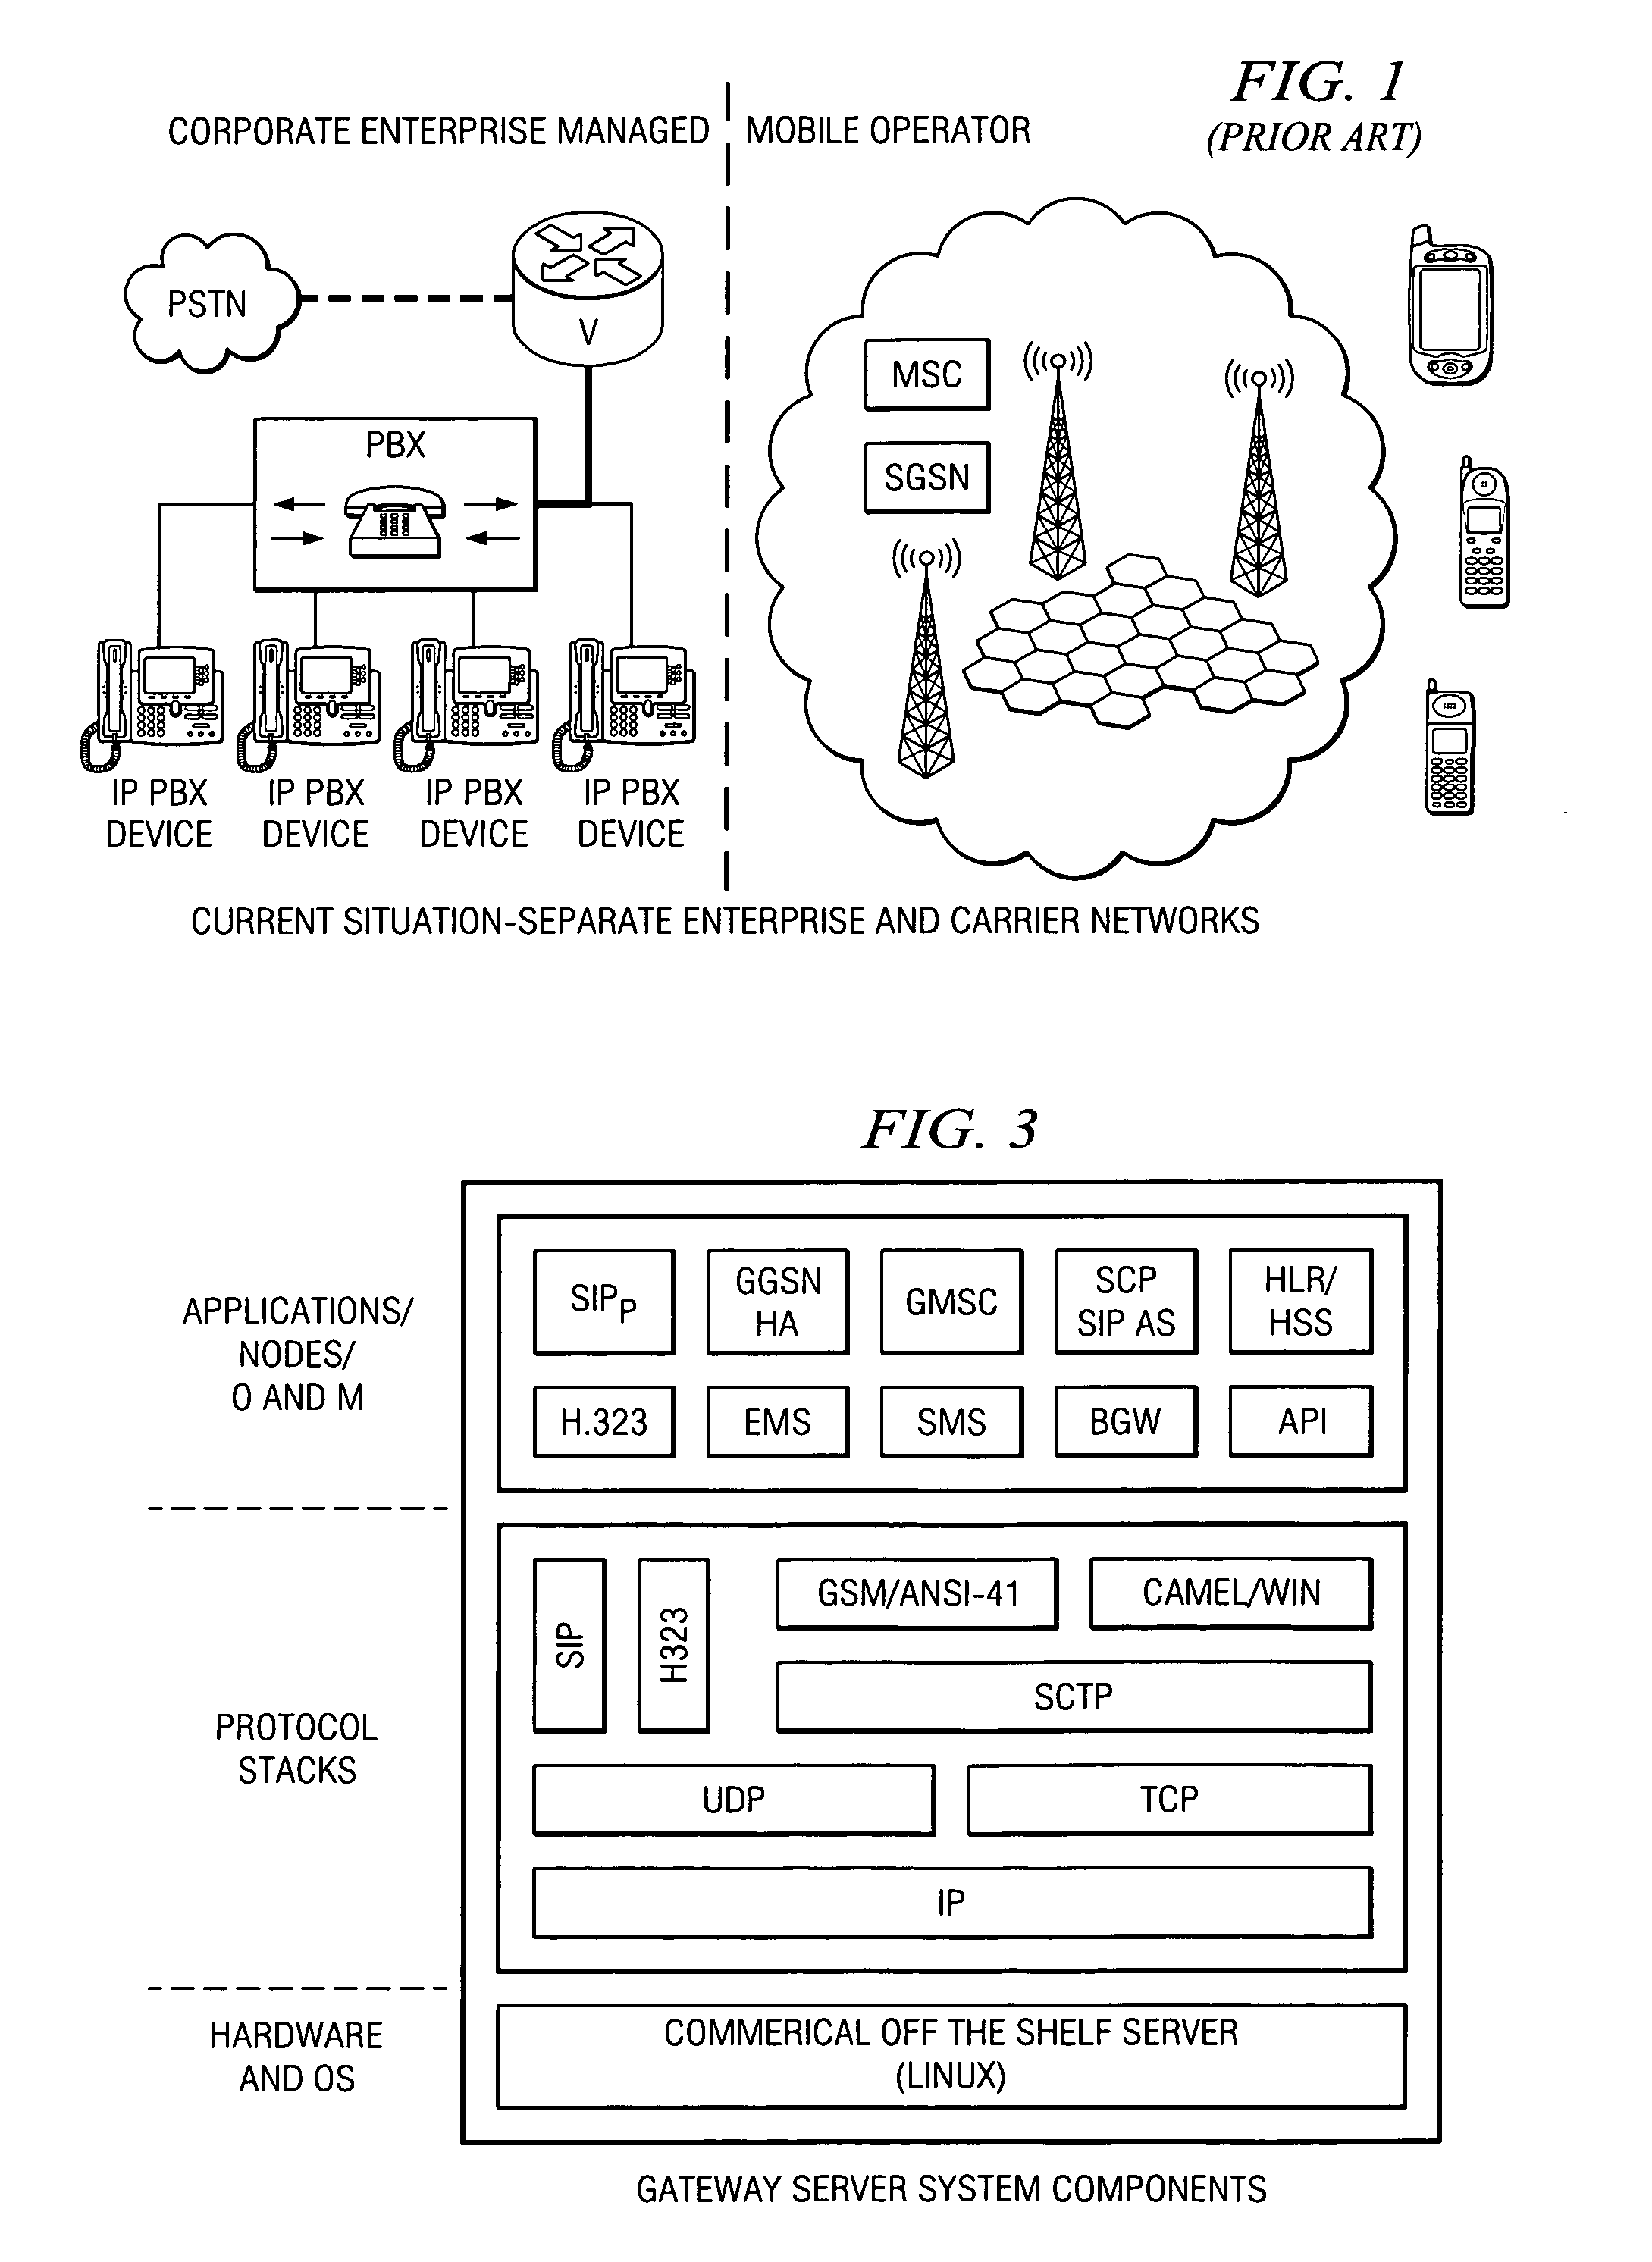 Mobile application gateway for connecting devices on a cellular network with individual enterprise and data networks